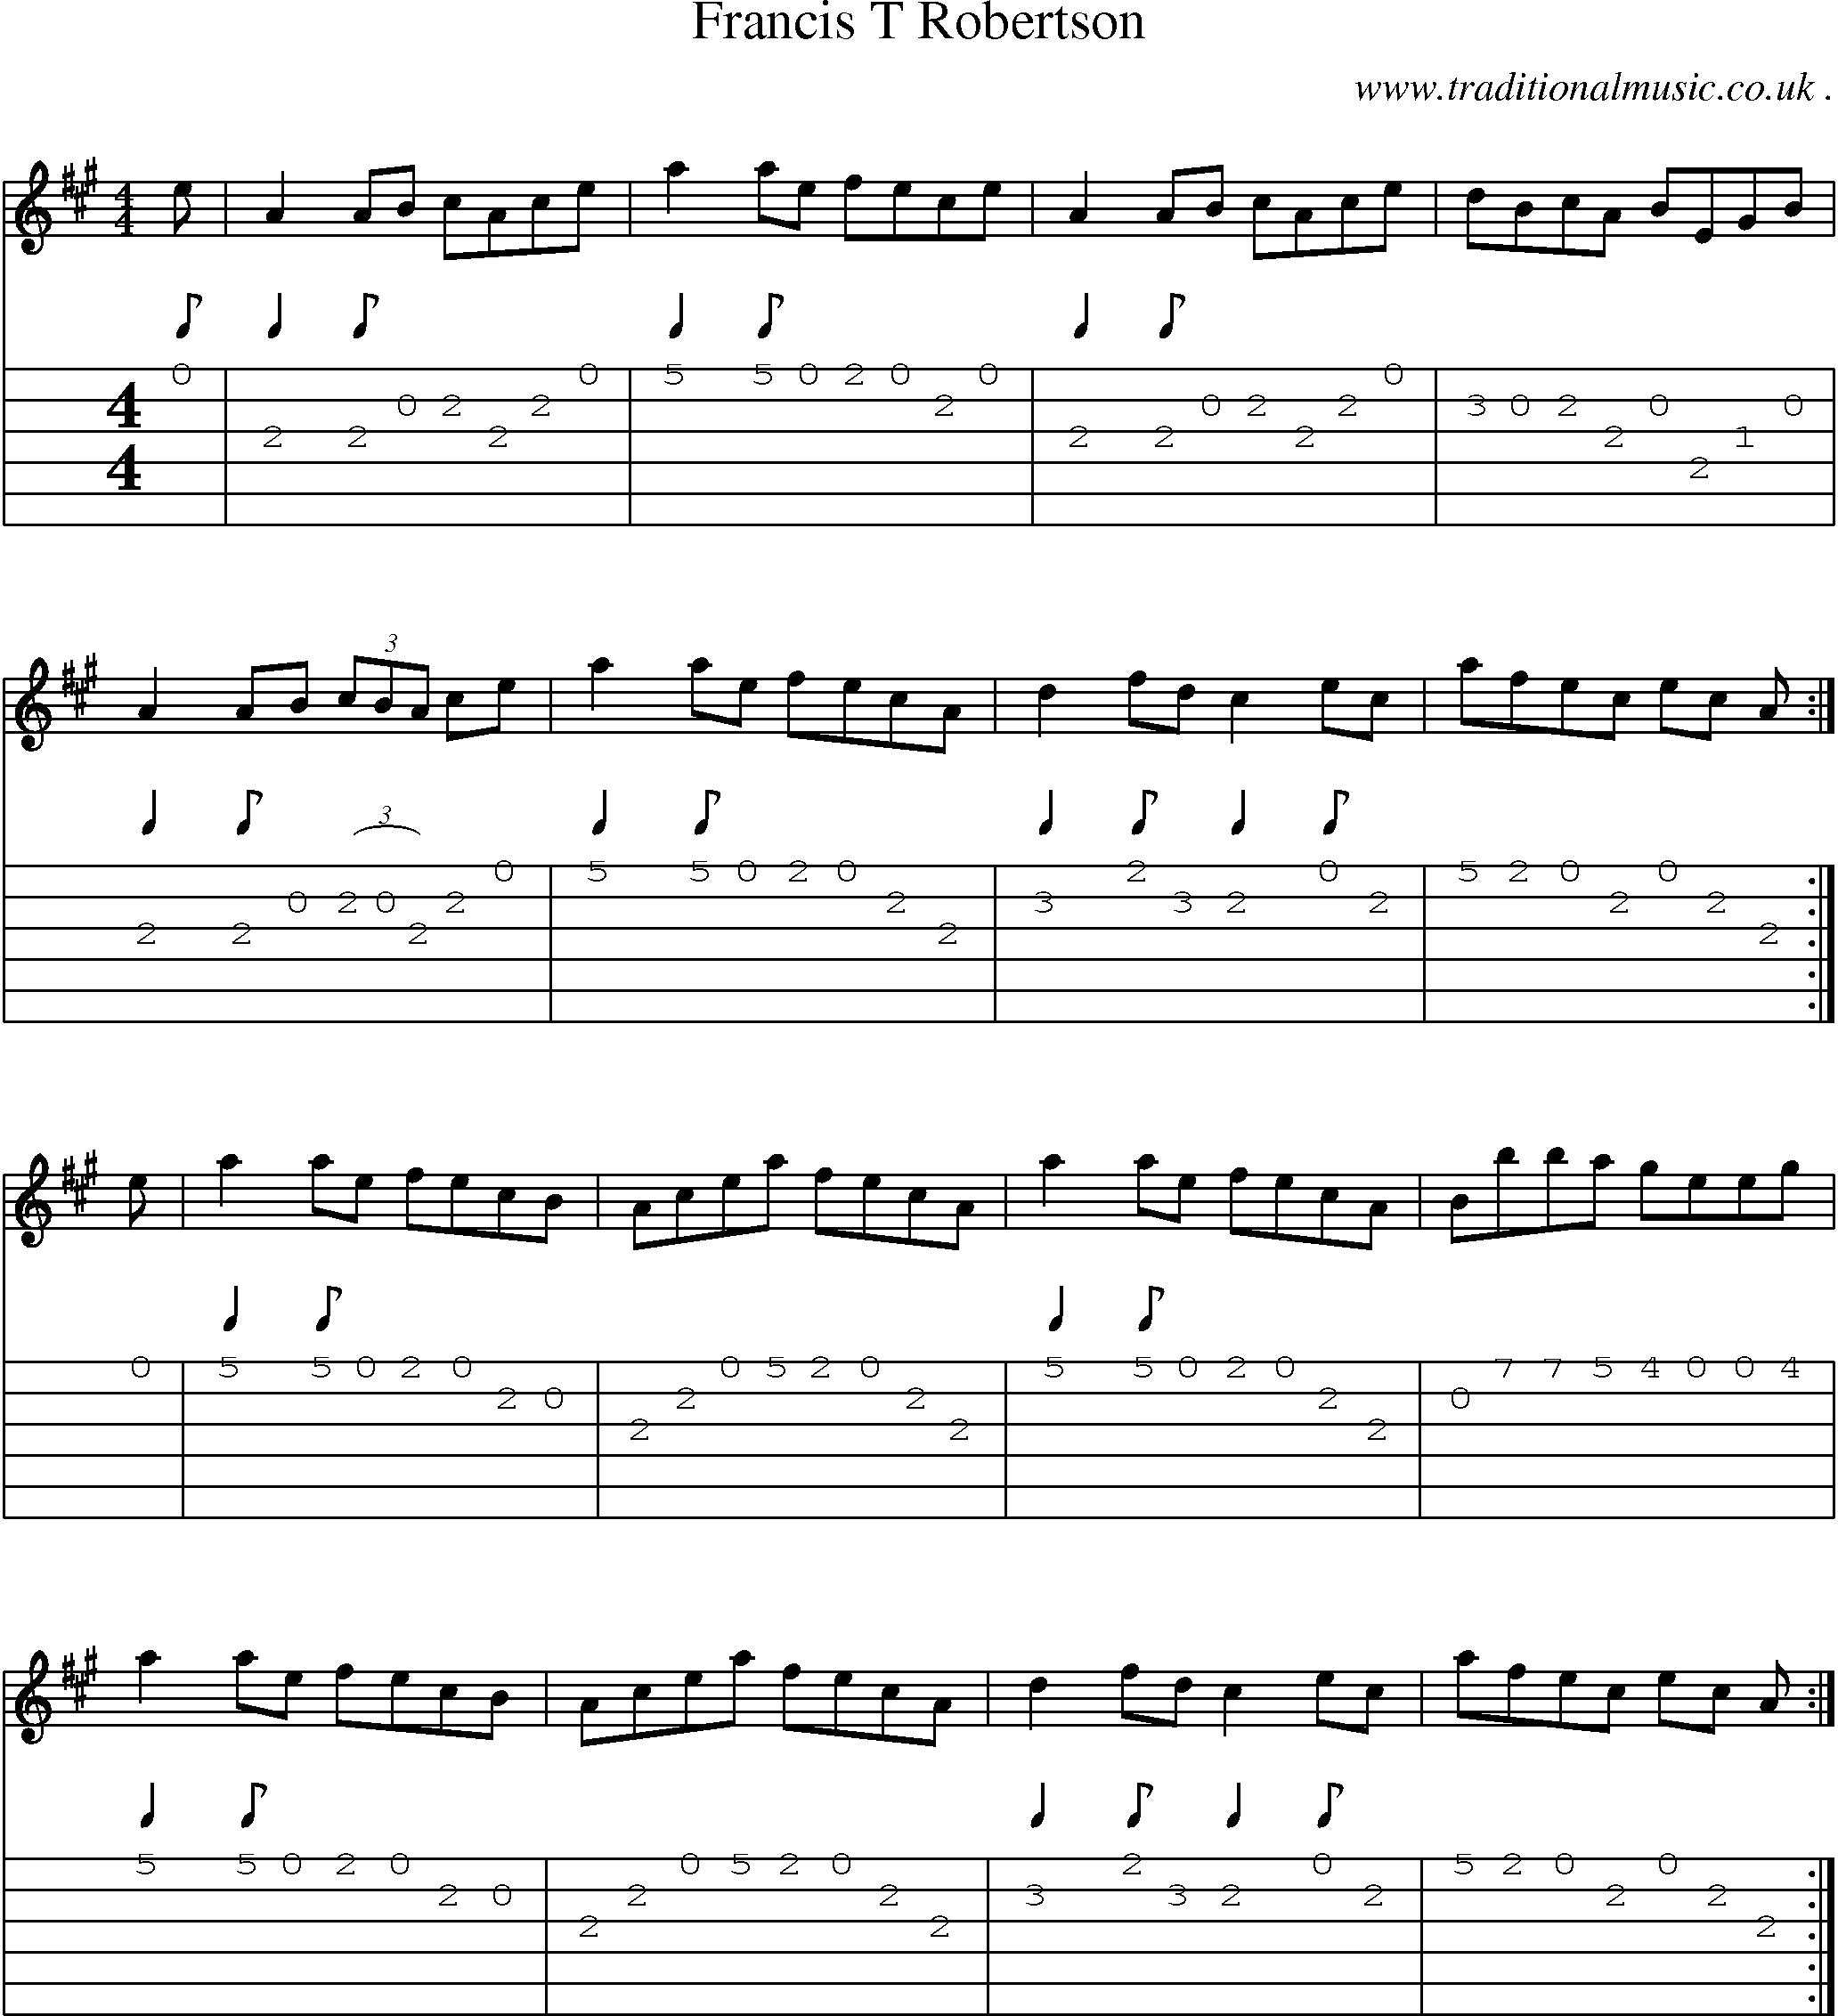 Sheet-music  score, Chords and Guitar Tabs for Francis T Robertson